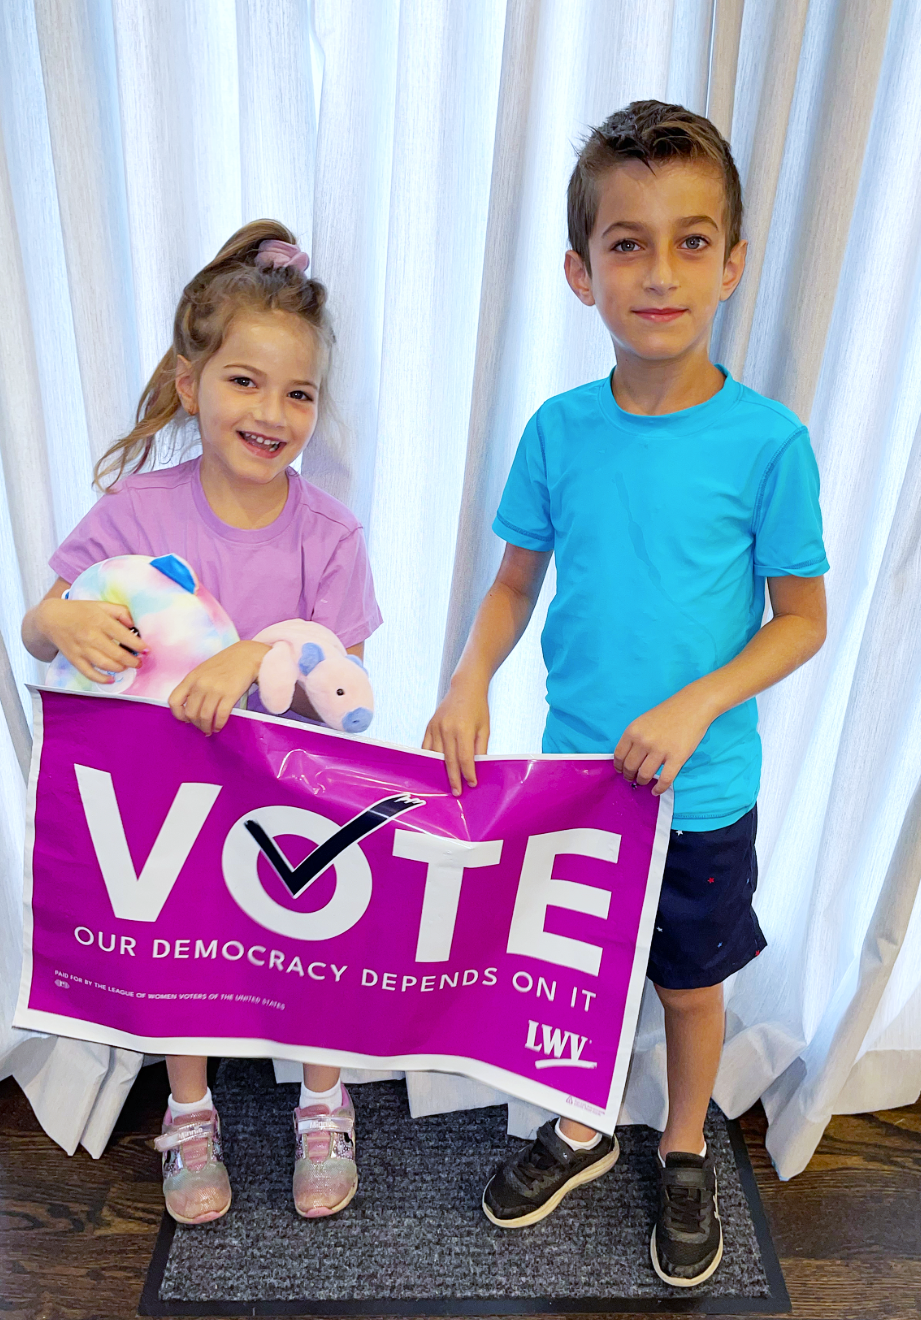 Kids holding a "VOTE" sign.